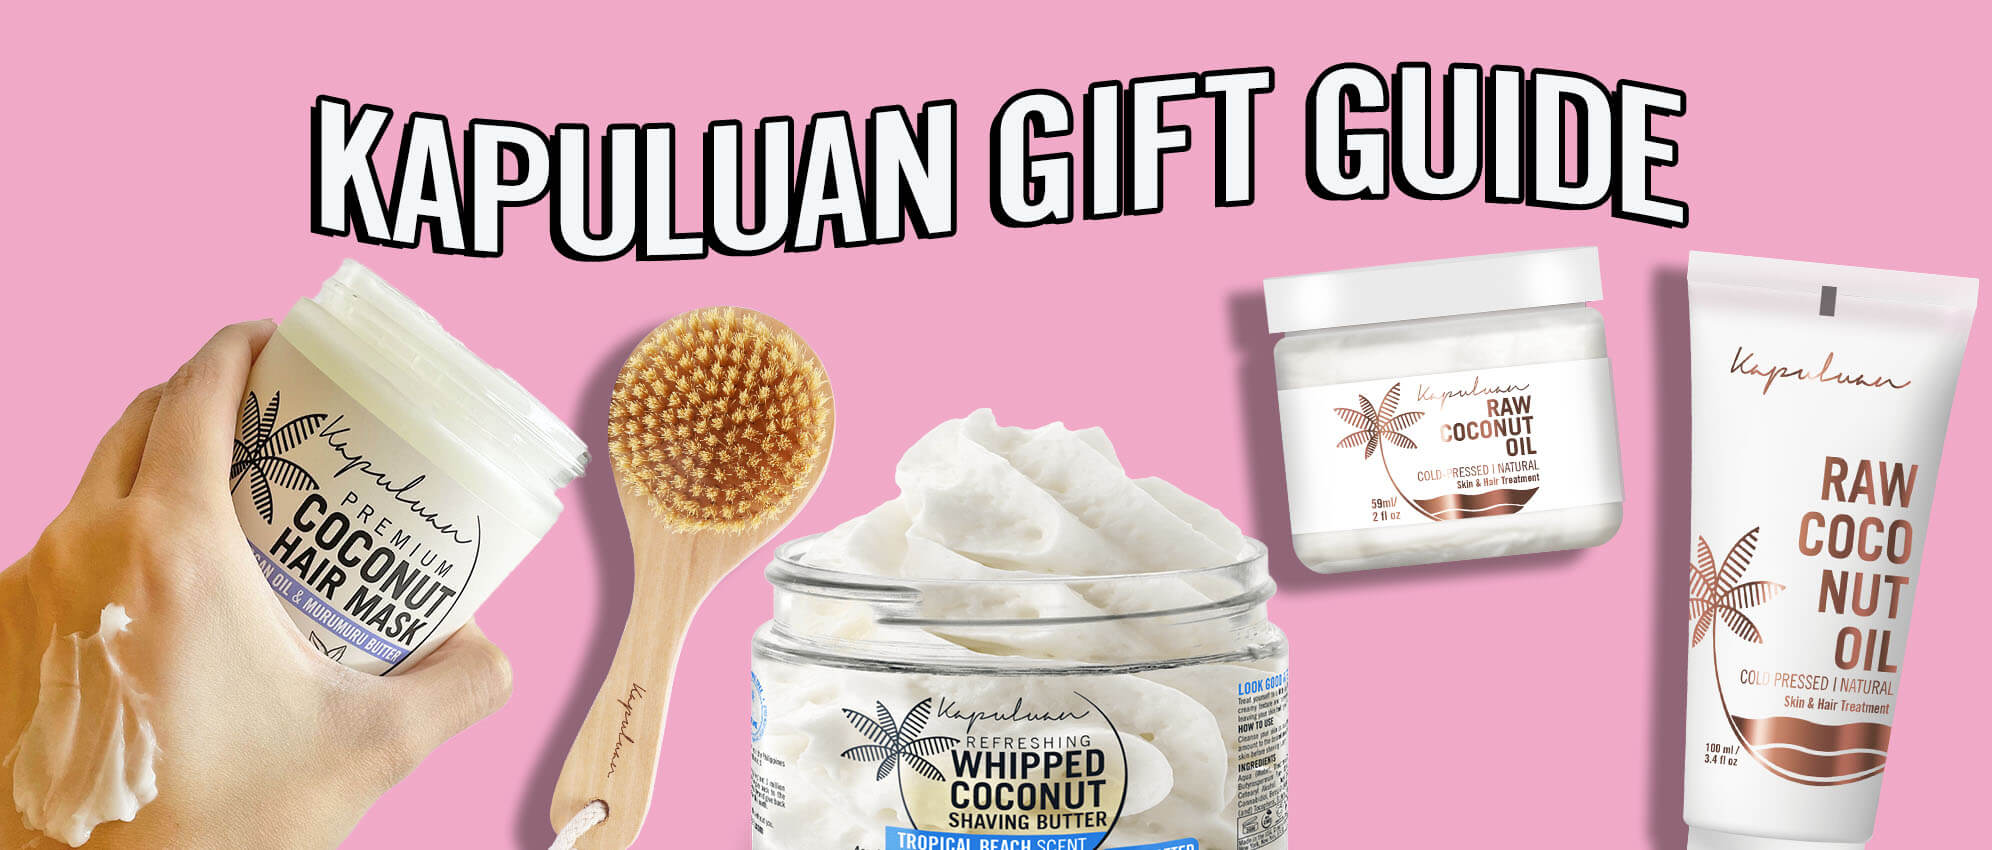 Promotional image for kapuluan gift guide featuring various coconut-based products including a body brush, whipped coconut oil, and coconut hair mask on a pink background.